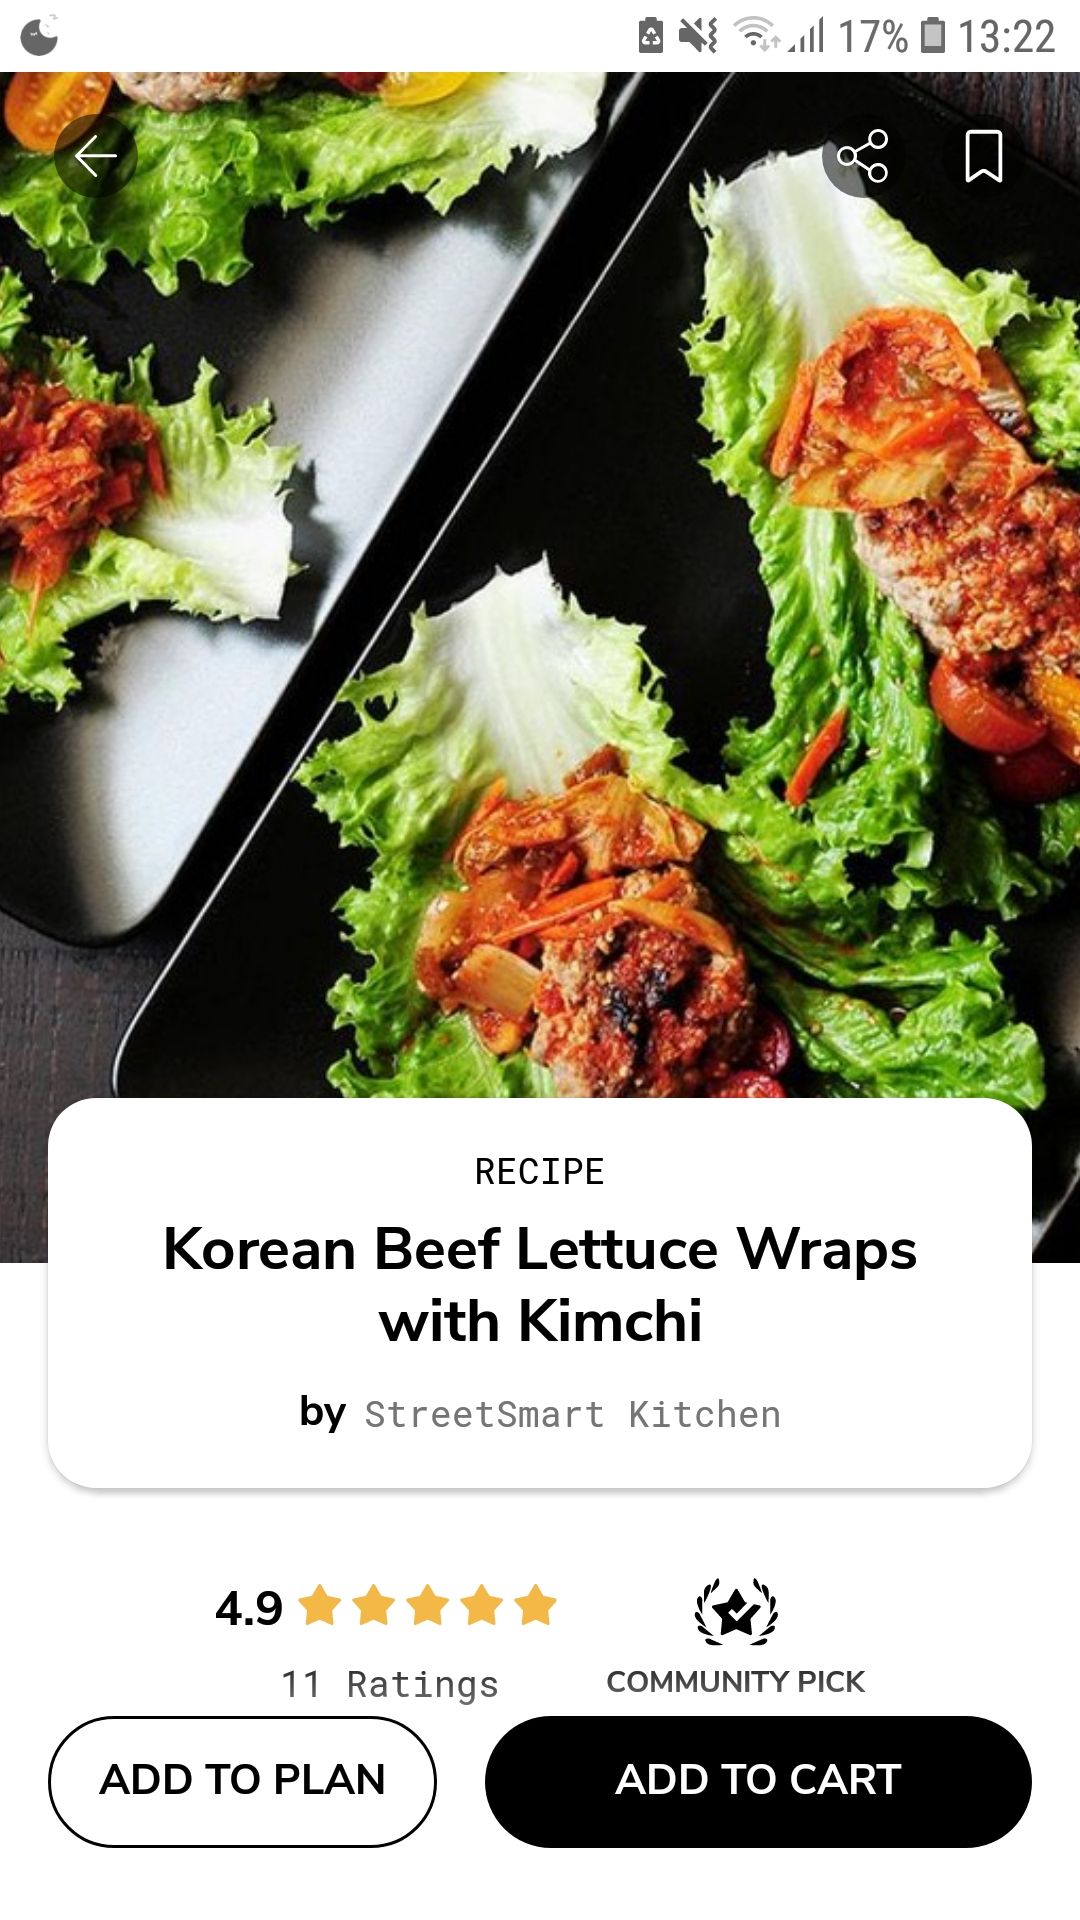 SideChef mobile recipe and meal planning app recipes